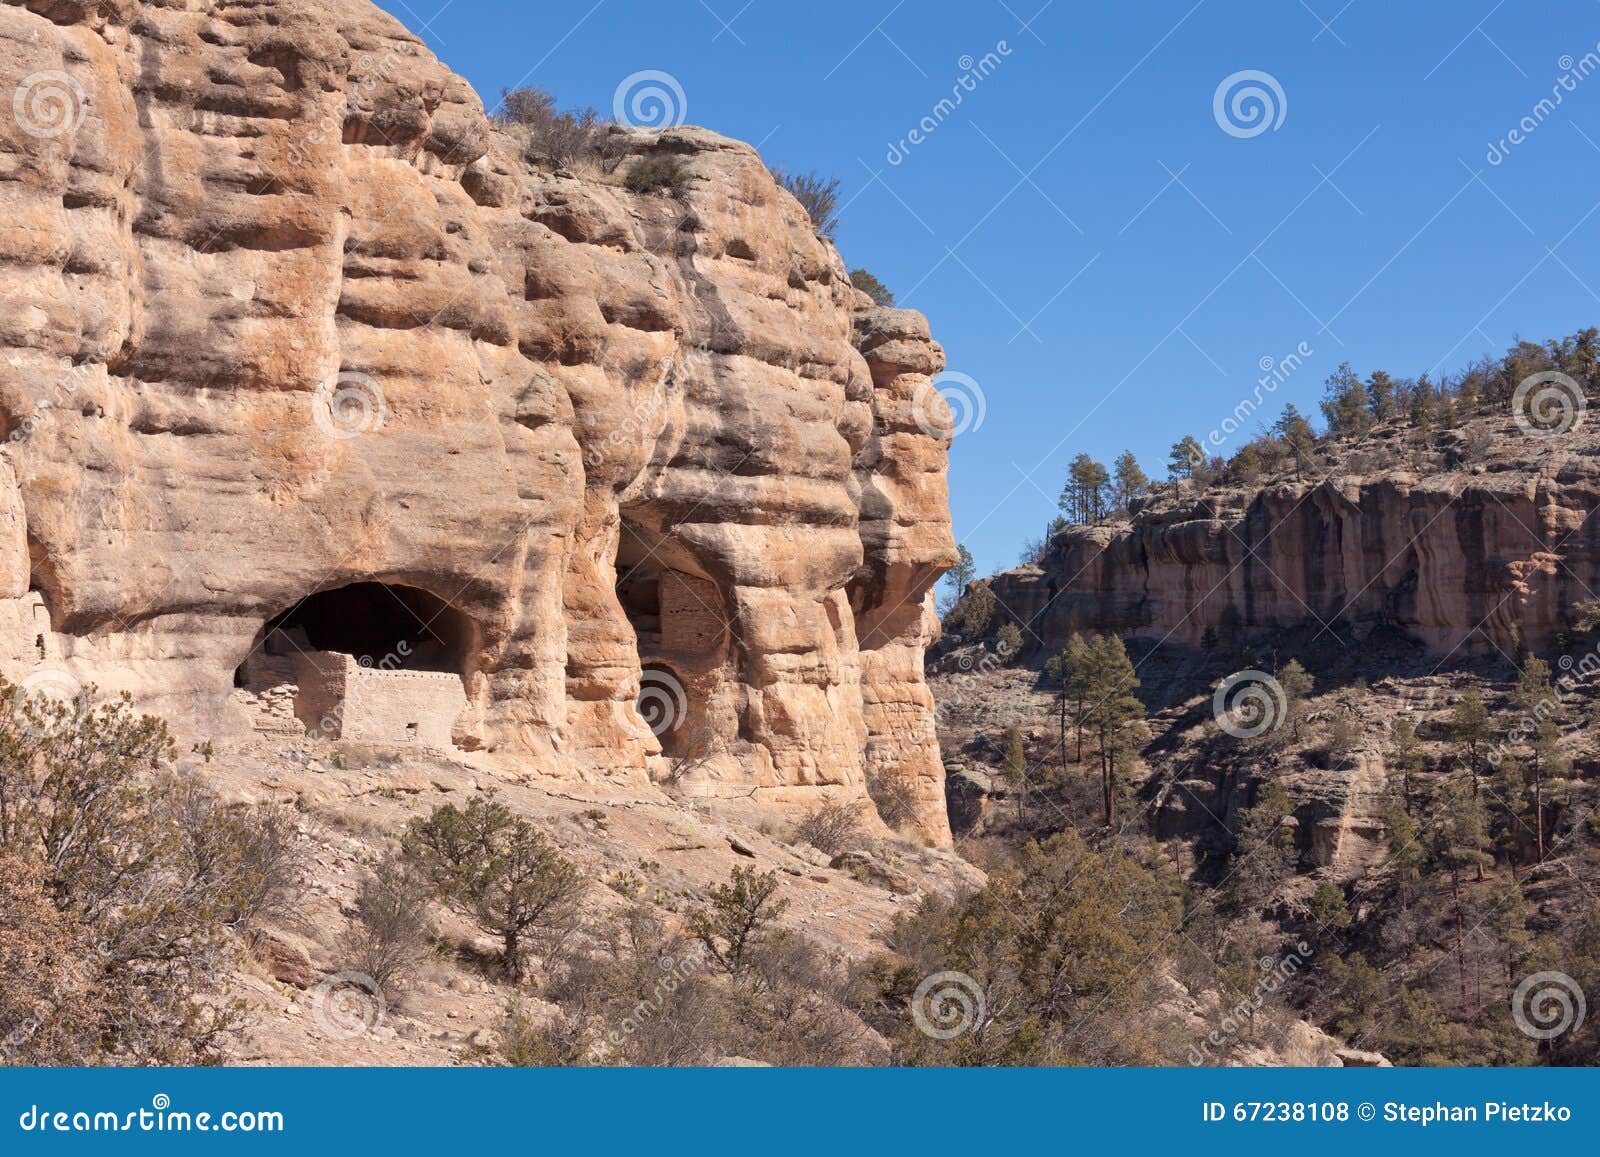 gila cliff dwellings national monument new mexico